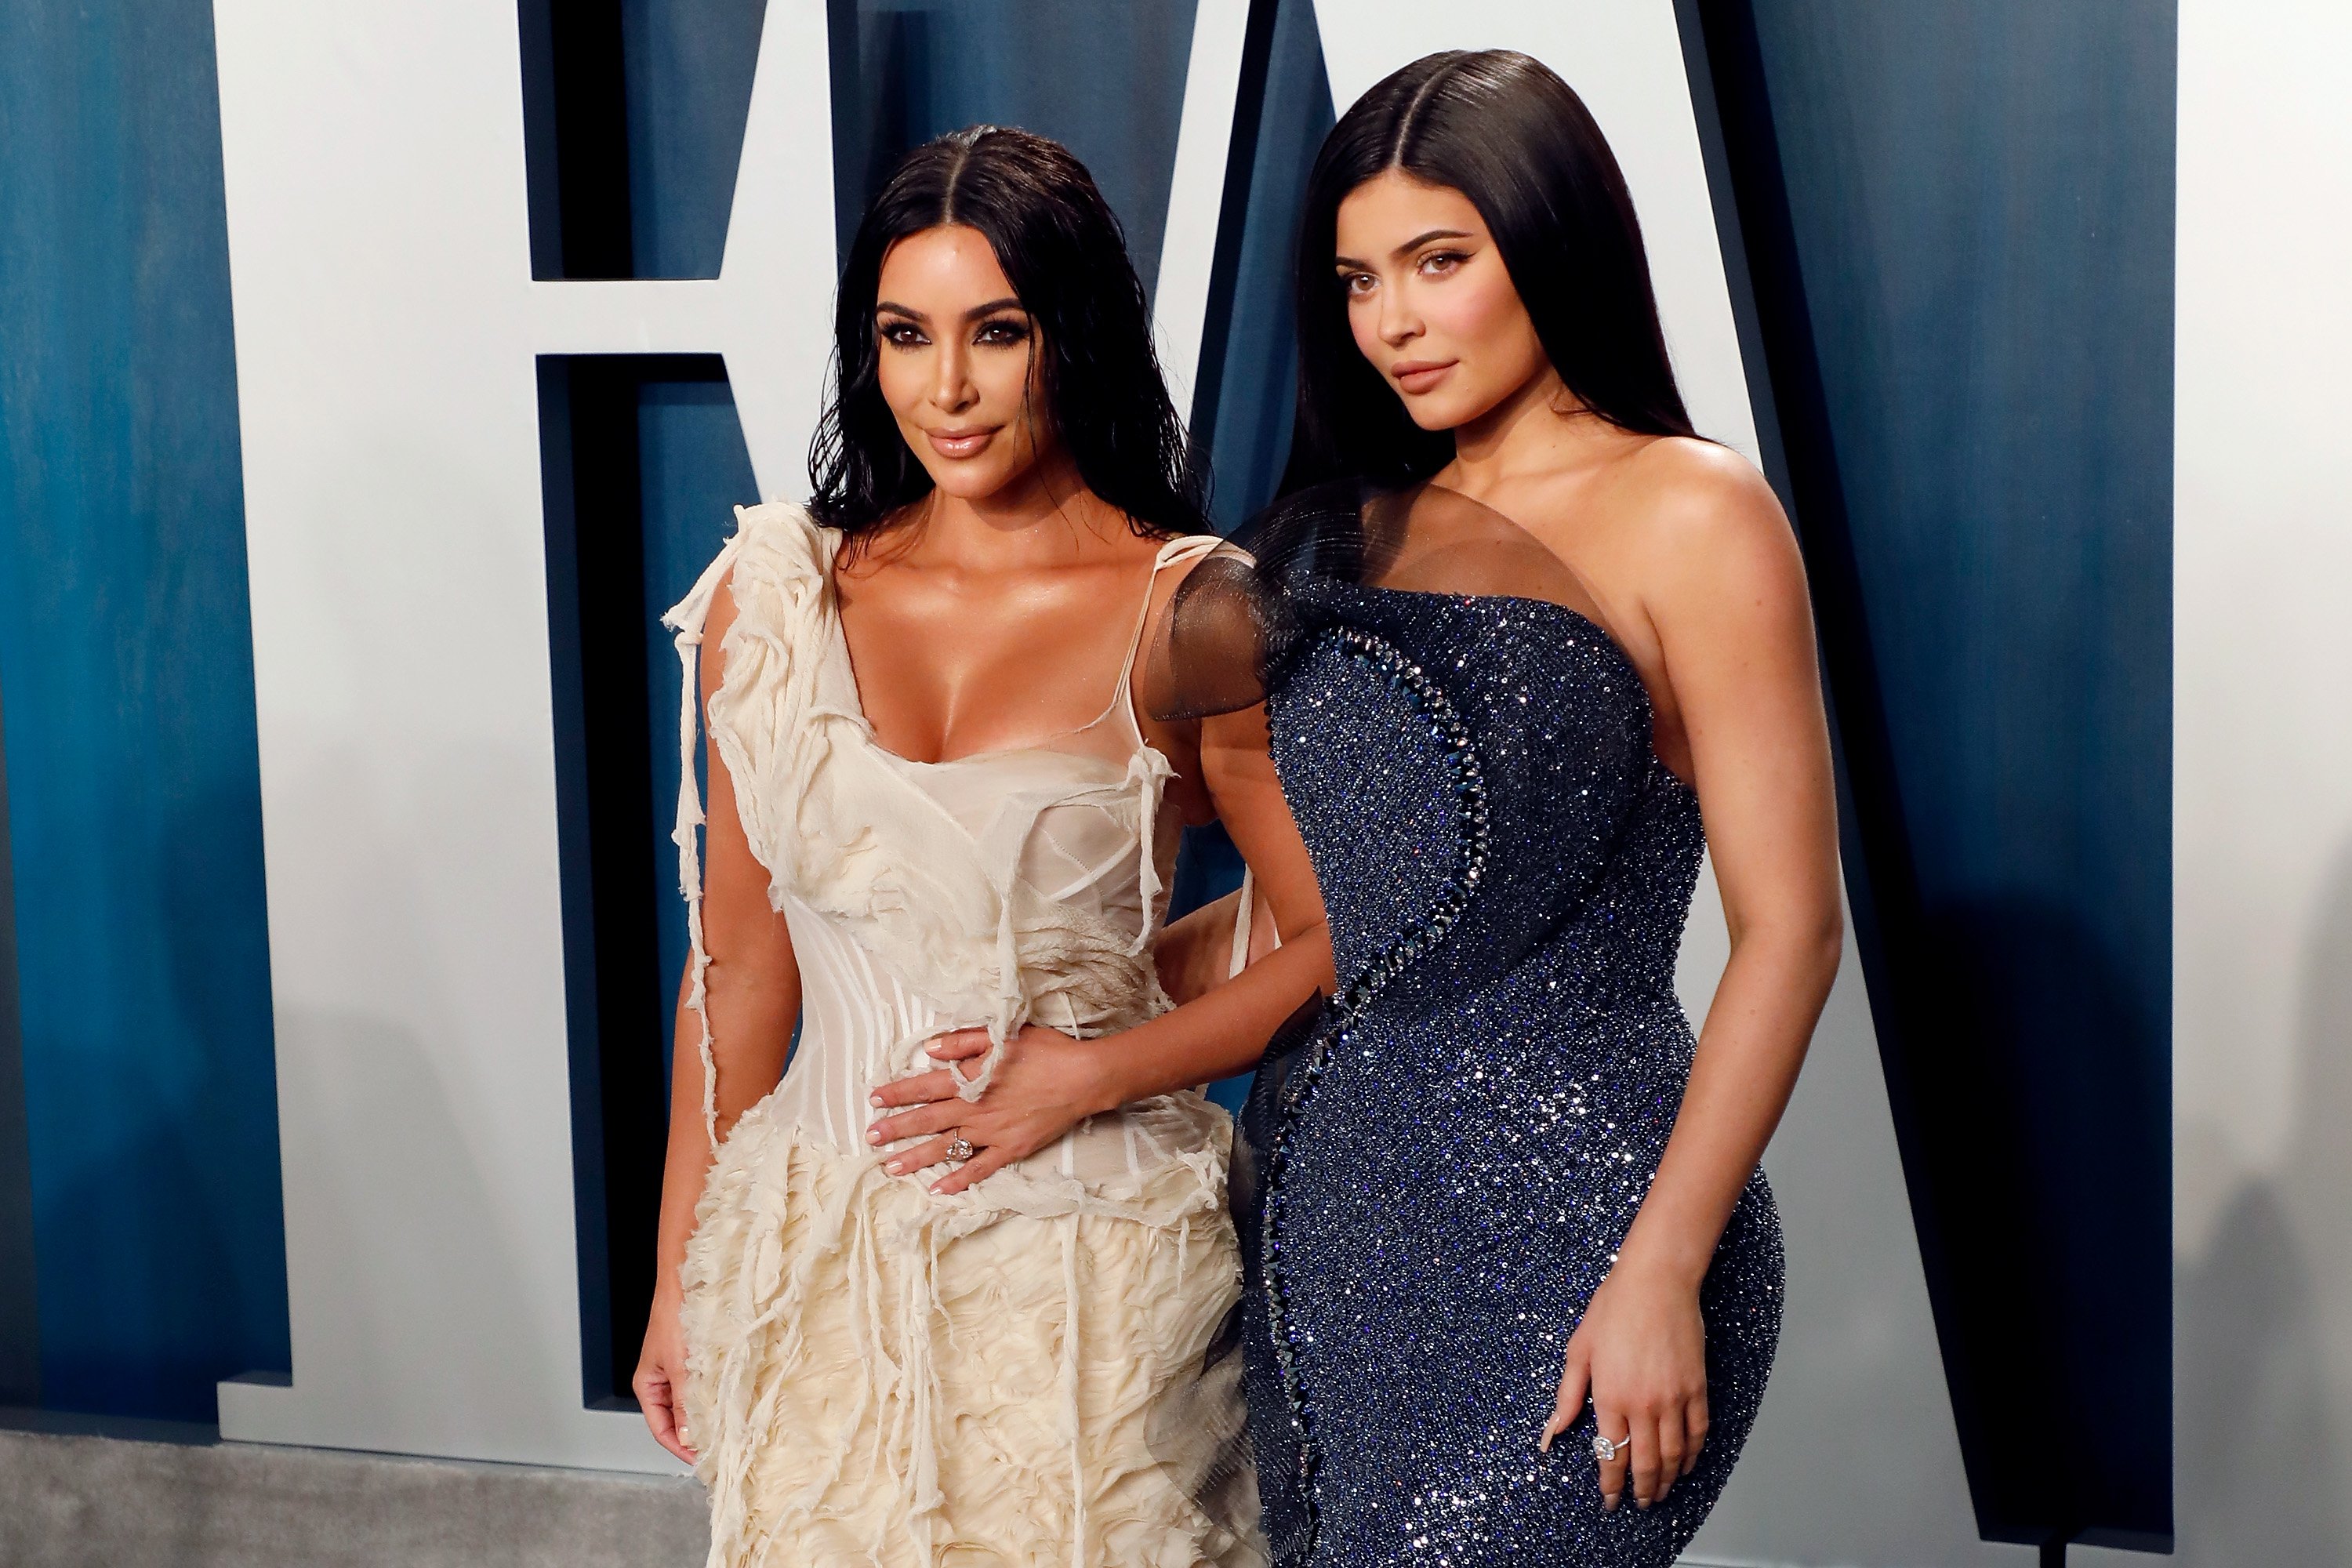 Kim Kardashian West and Kylie Jenner pose together in evening gowns at the 2020 Vanity Fair Oscar Party